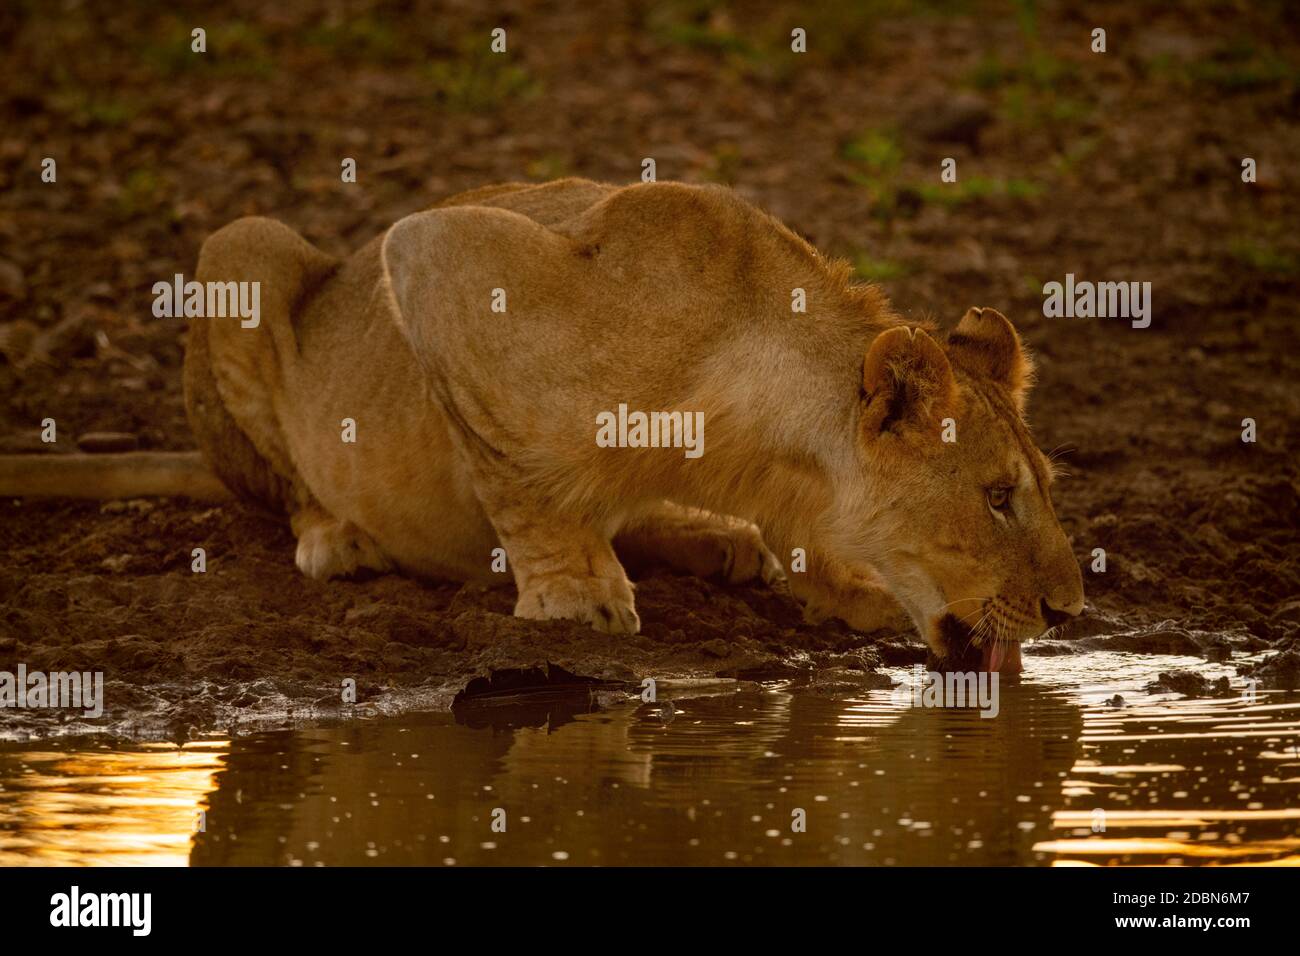 Lioness lying drinking from muddy water hole Stock Photo